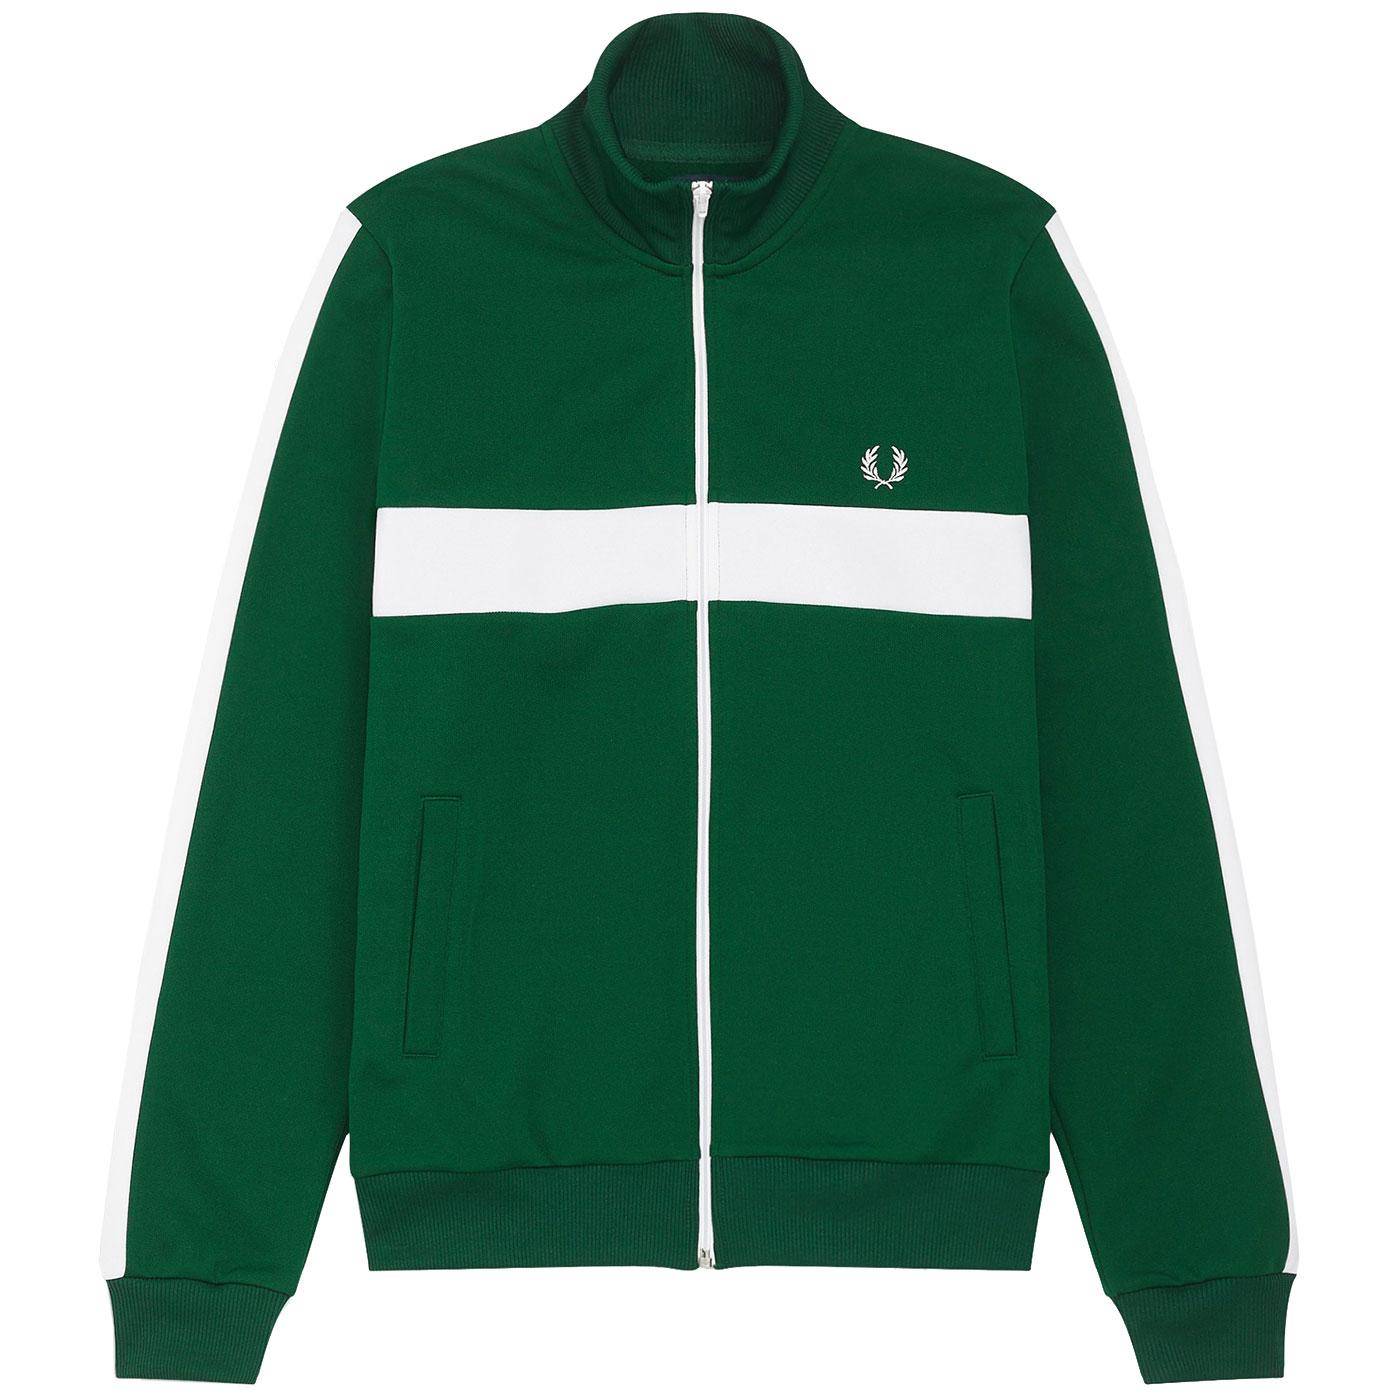 FRED PERRY Men's Retro Contrast Panel Track Jacket in Ivy